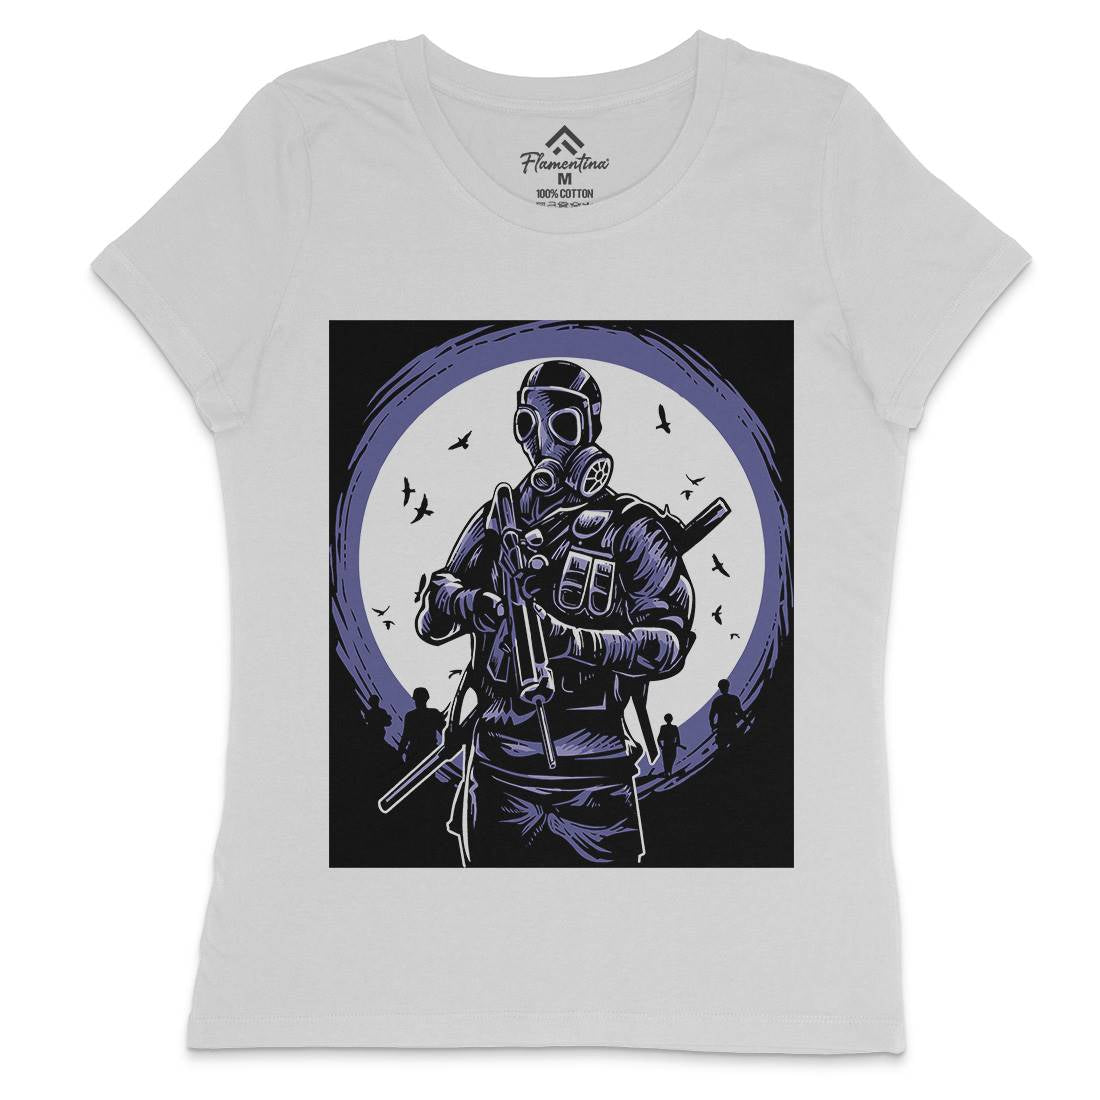 Mask Soldier Womens Crew Neck T-Shirt Horror A536